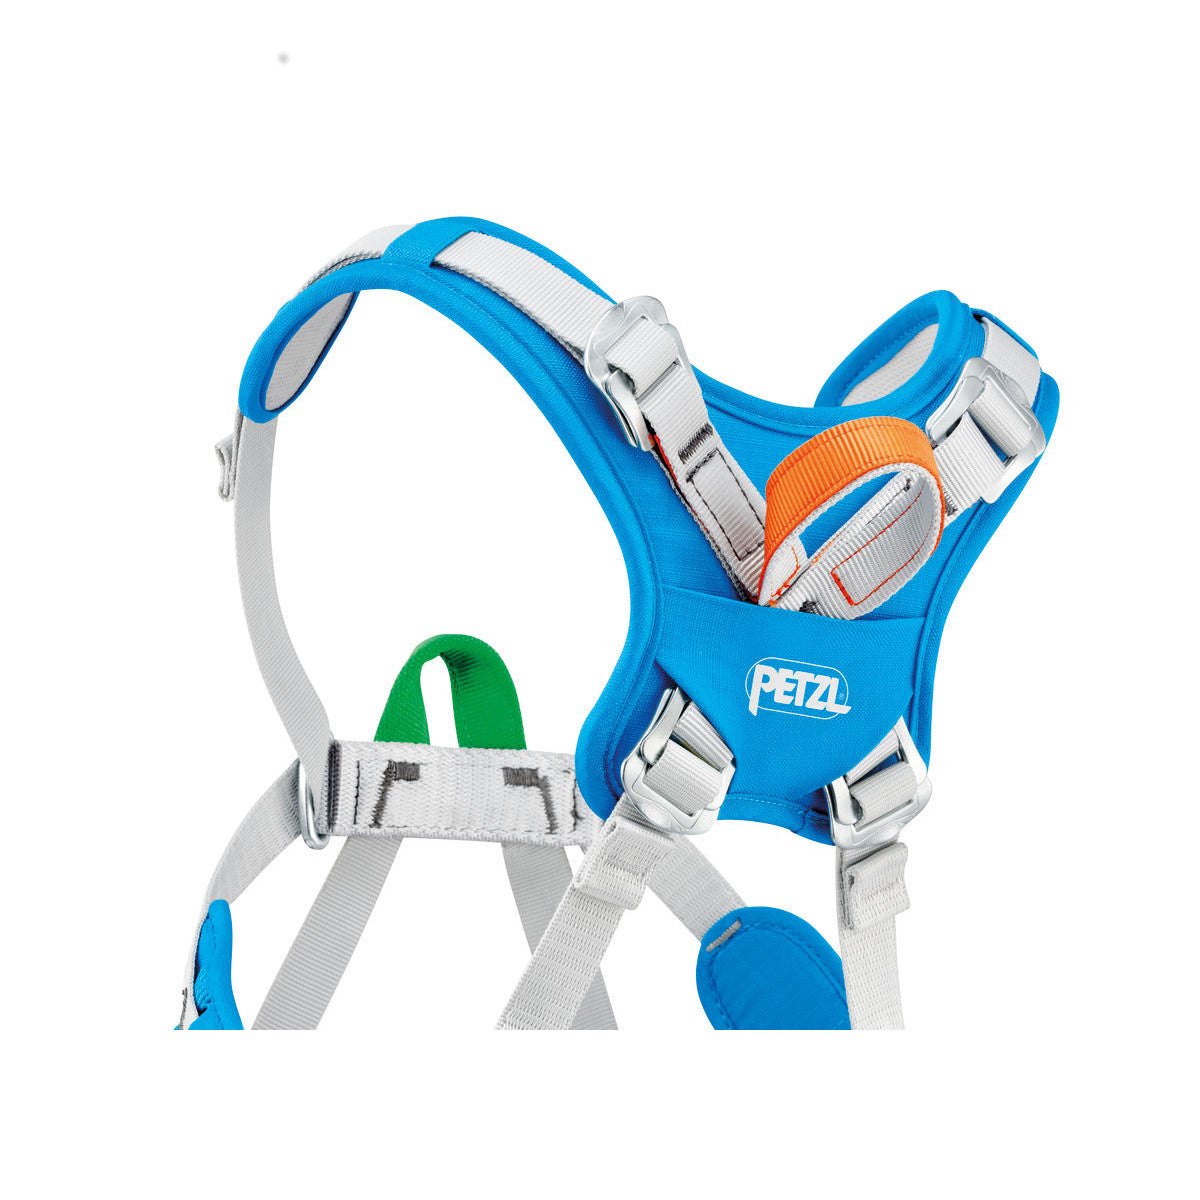 Petzl Ouistiti Kids Harness, close up of the back shoulder strap and rear loop design